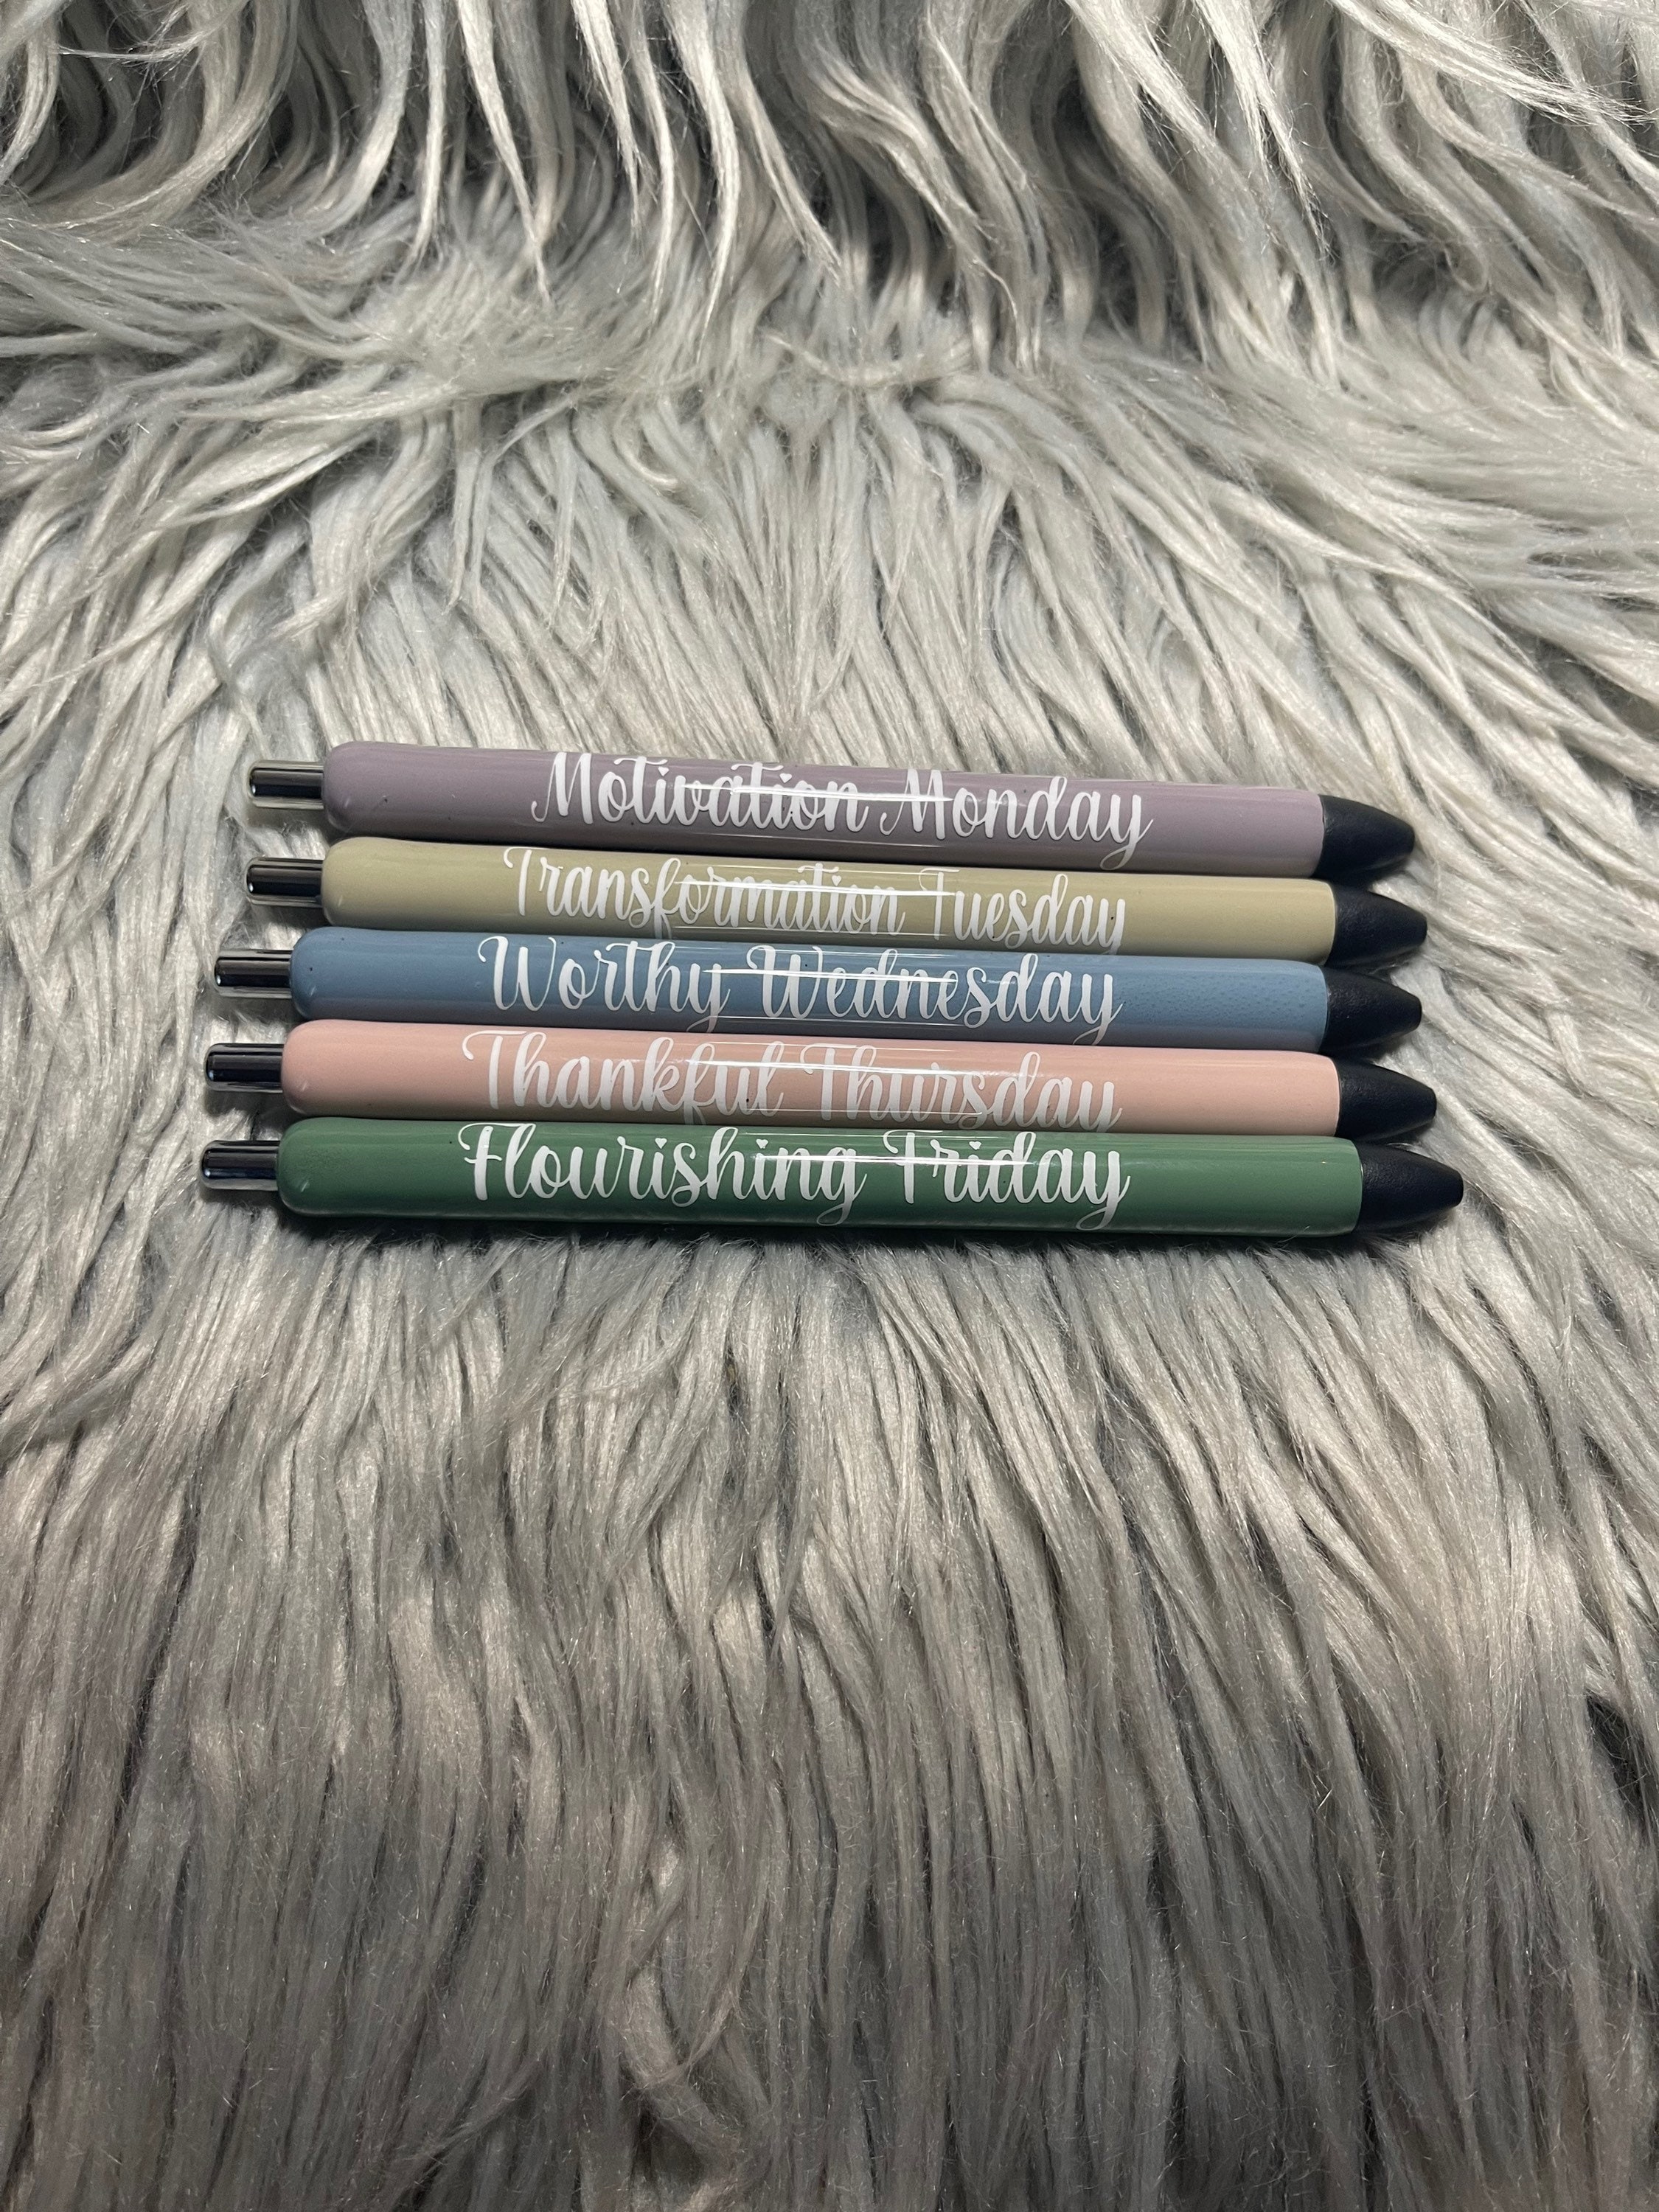 Positivity/affirmation weekday pens